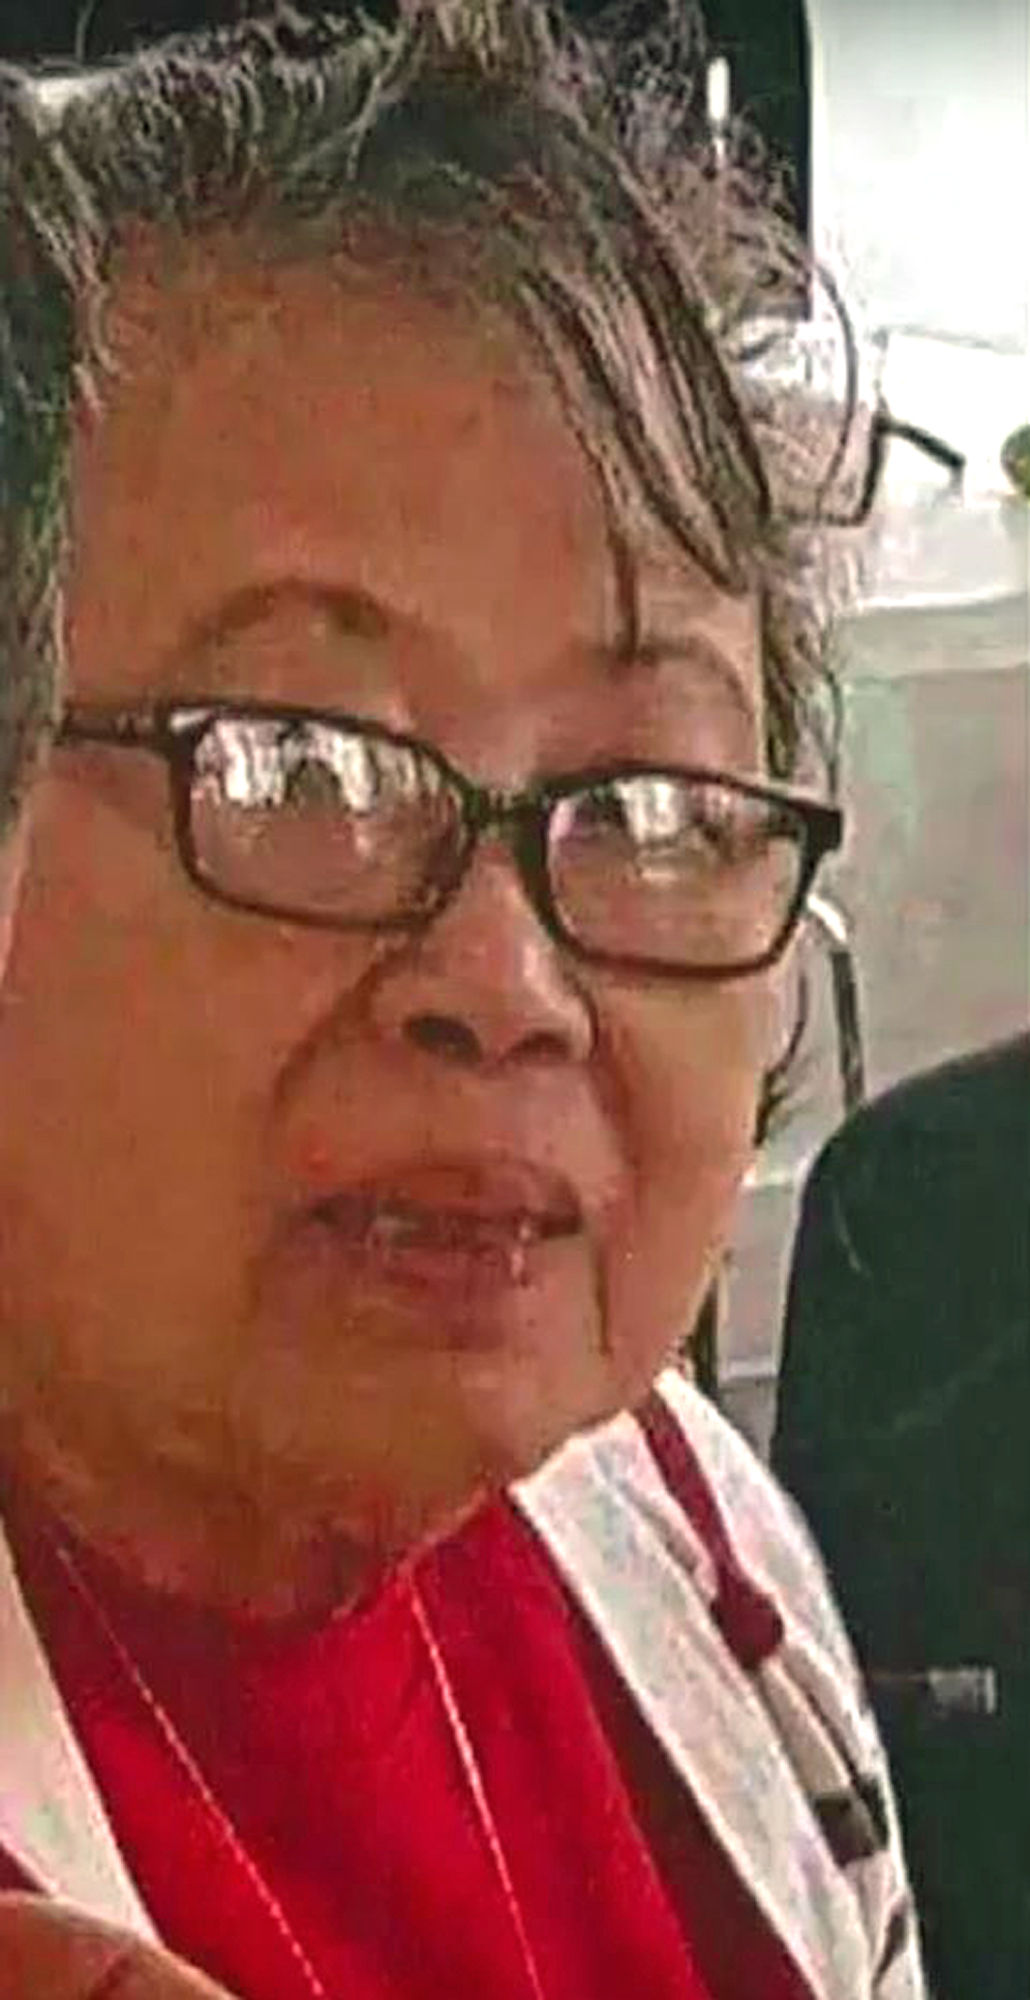 Ligaya Moore, who died in the Grenfell Tower fire